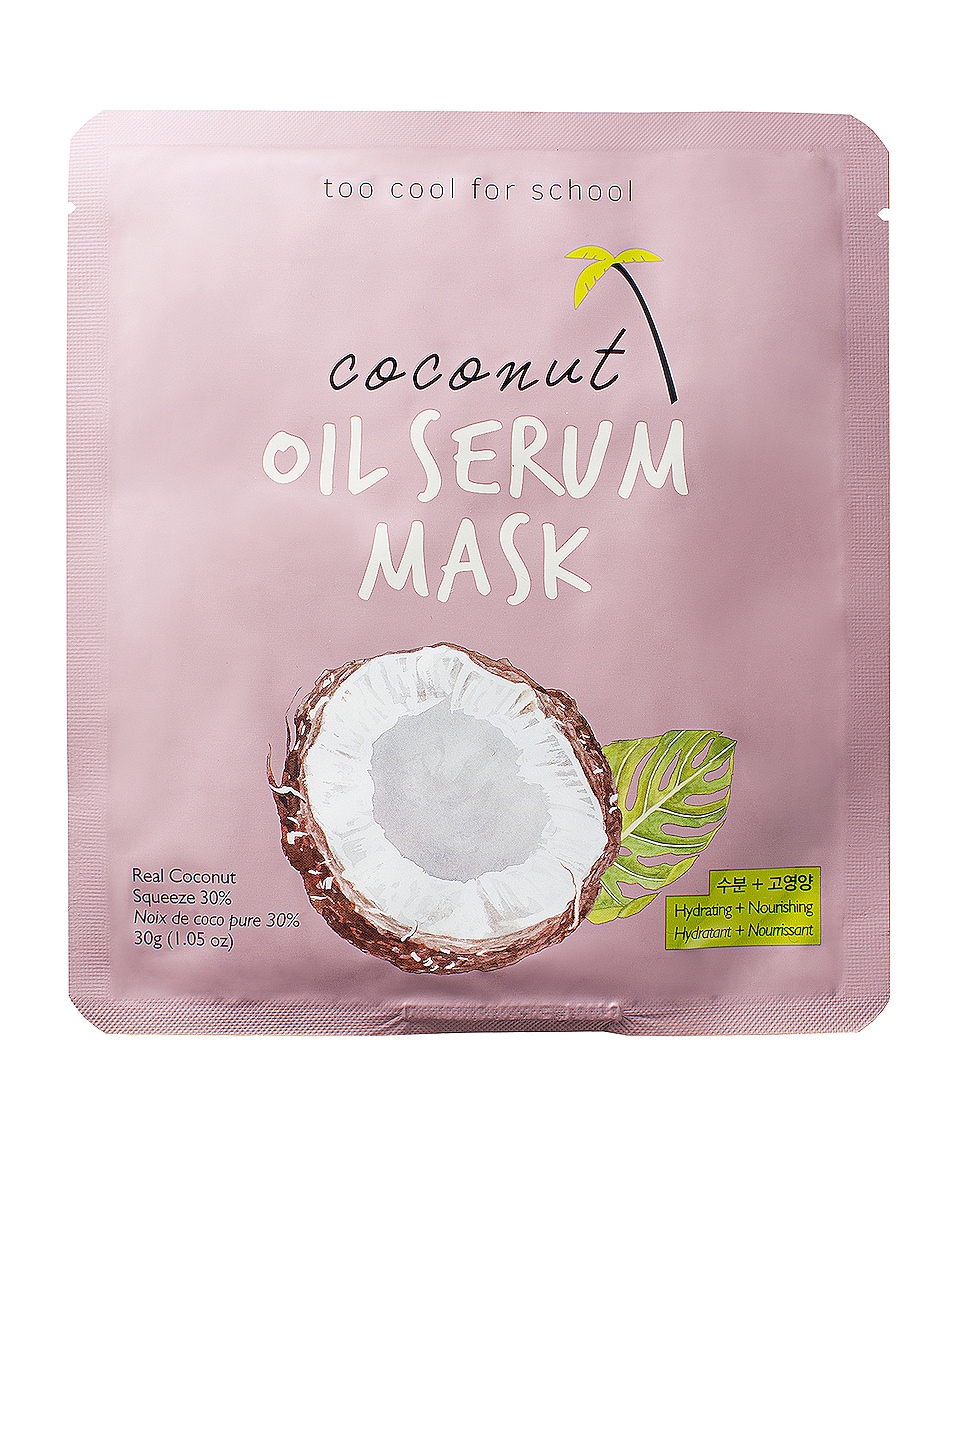 TOO COOL FOR SCHOOL COCONUT OIL SERUM MASK,TCOL-WU15